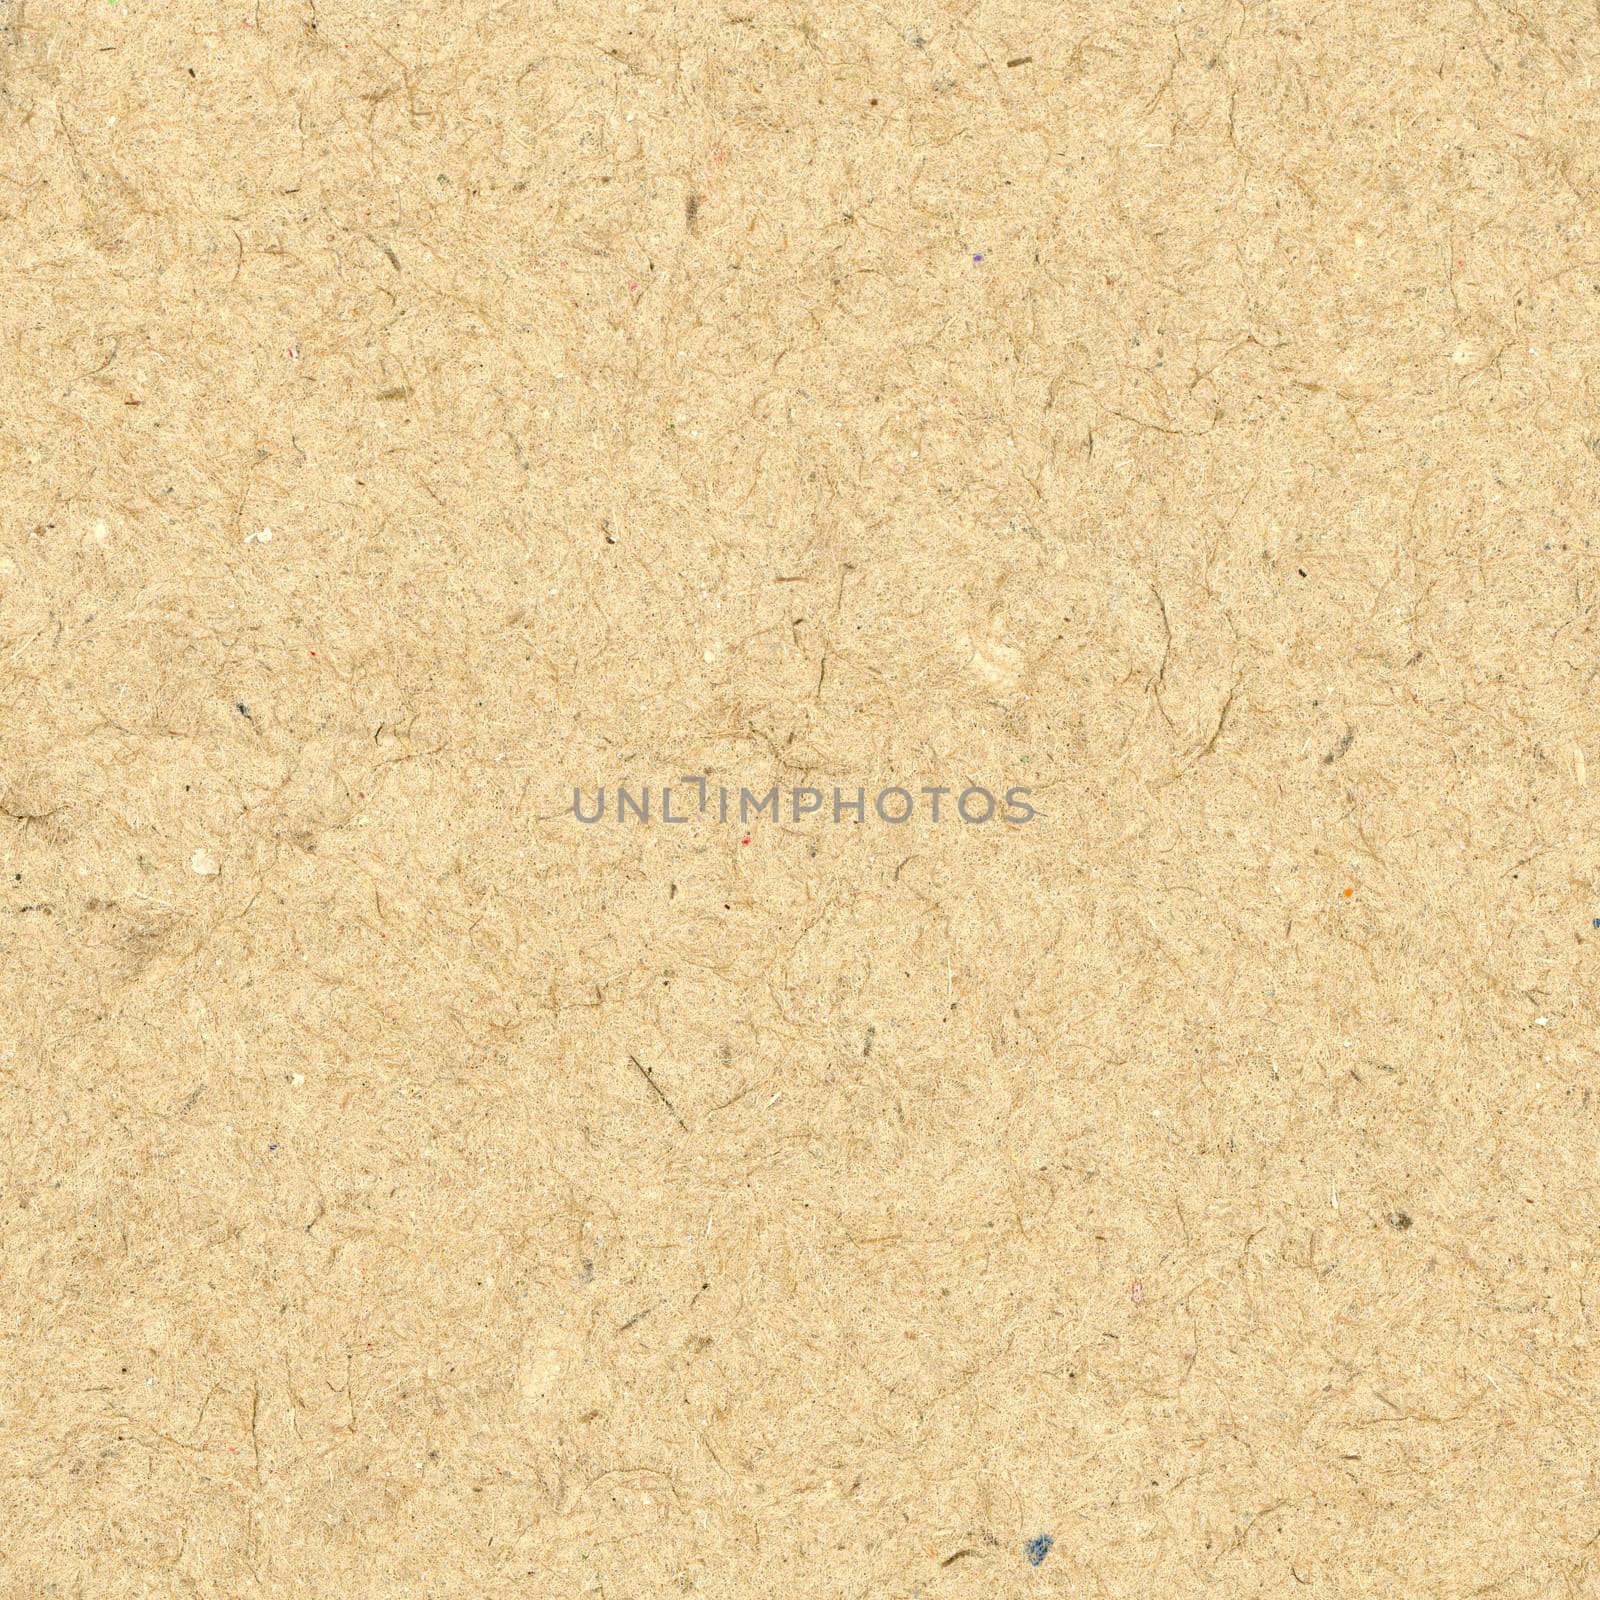 light brown cardboard texture background by claudiodivizia